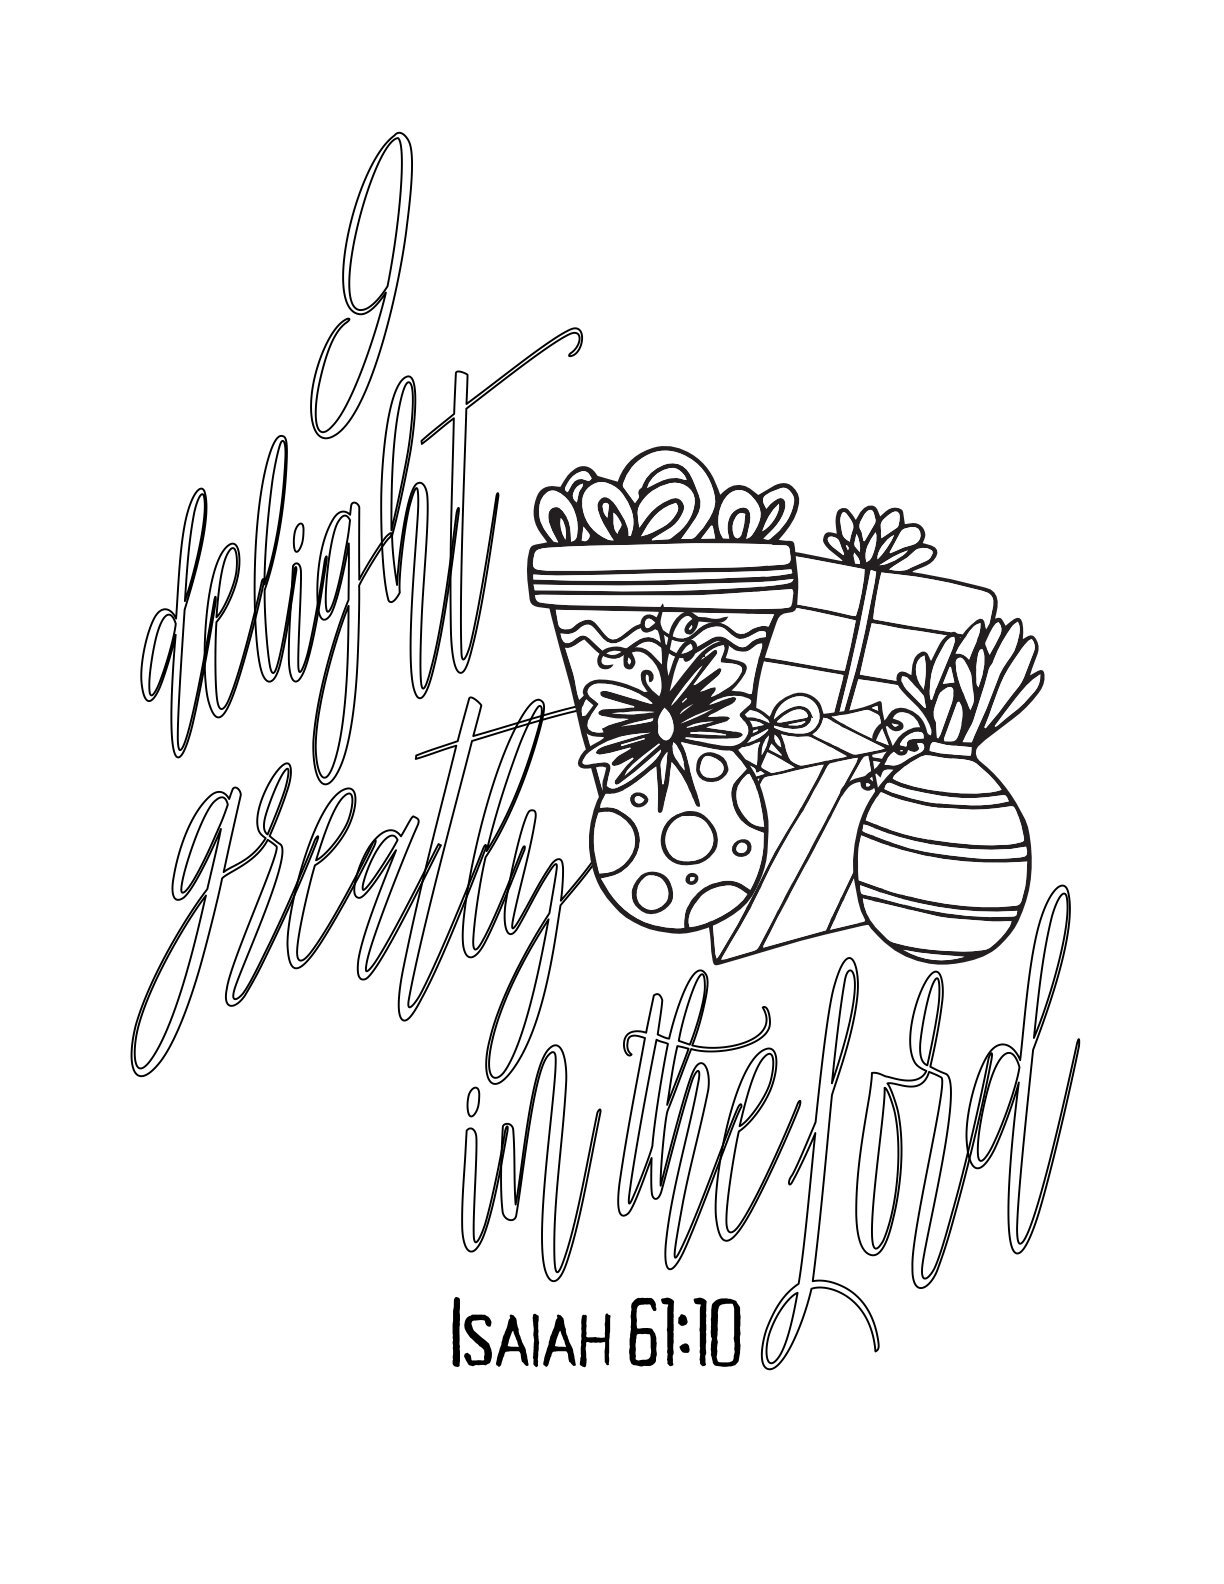 colorable text -  I Delight Greatly In The Lord - Isaiah 61:10 - Free Advent Printable CLICK HERE TO DOWNLOAD YOUR FREE CHRISTMAS COLORING PAGE